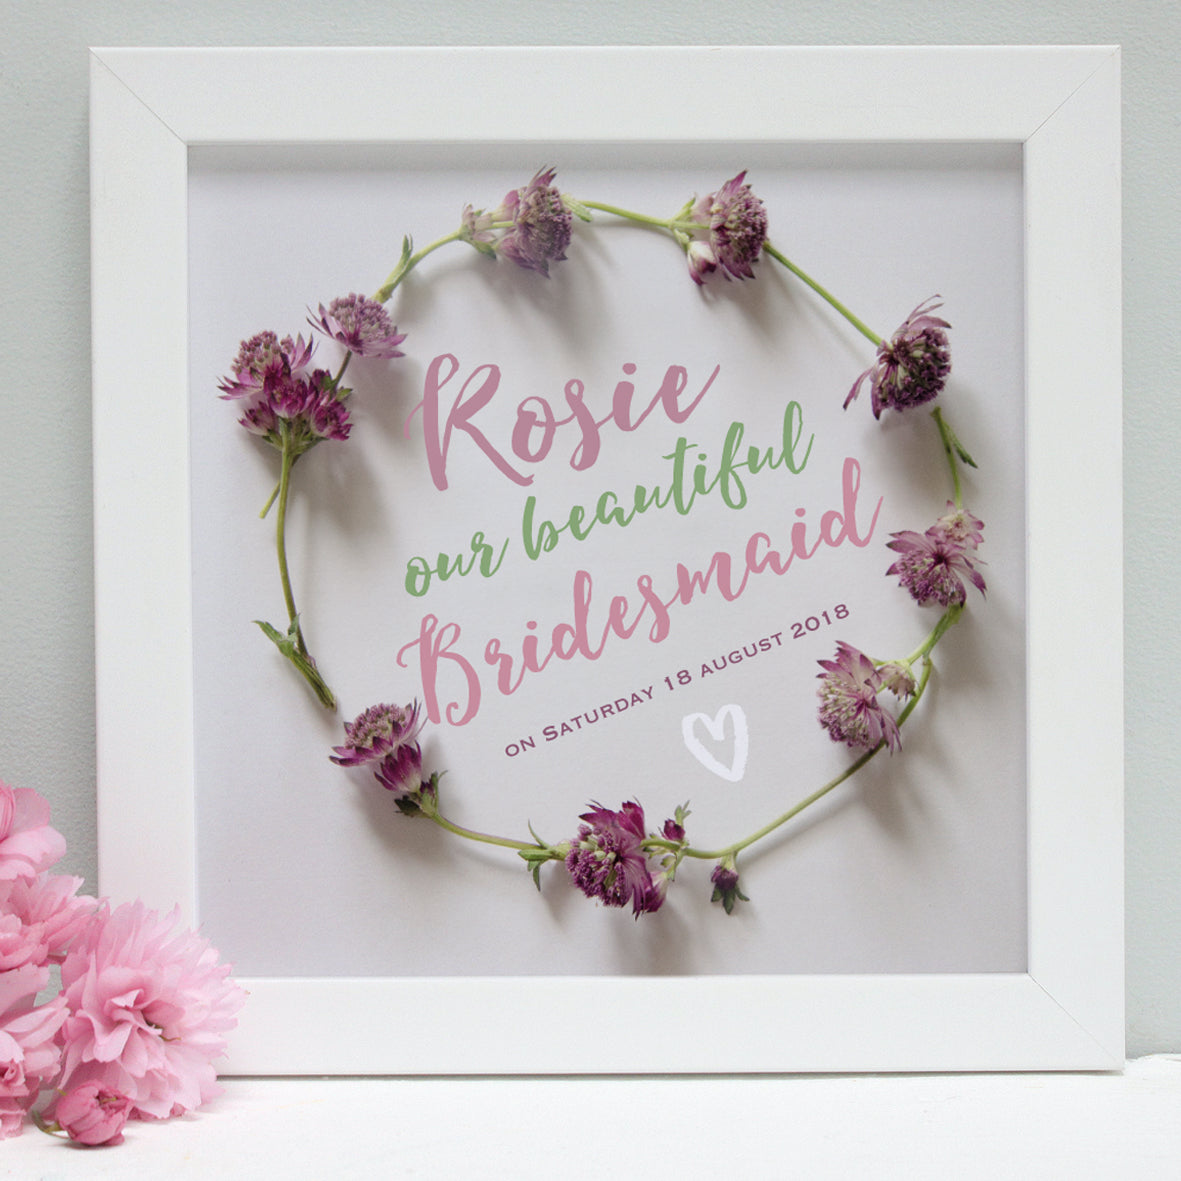 personalised daisy chain bridesmaid print, white frame